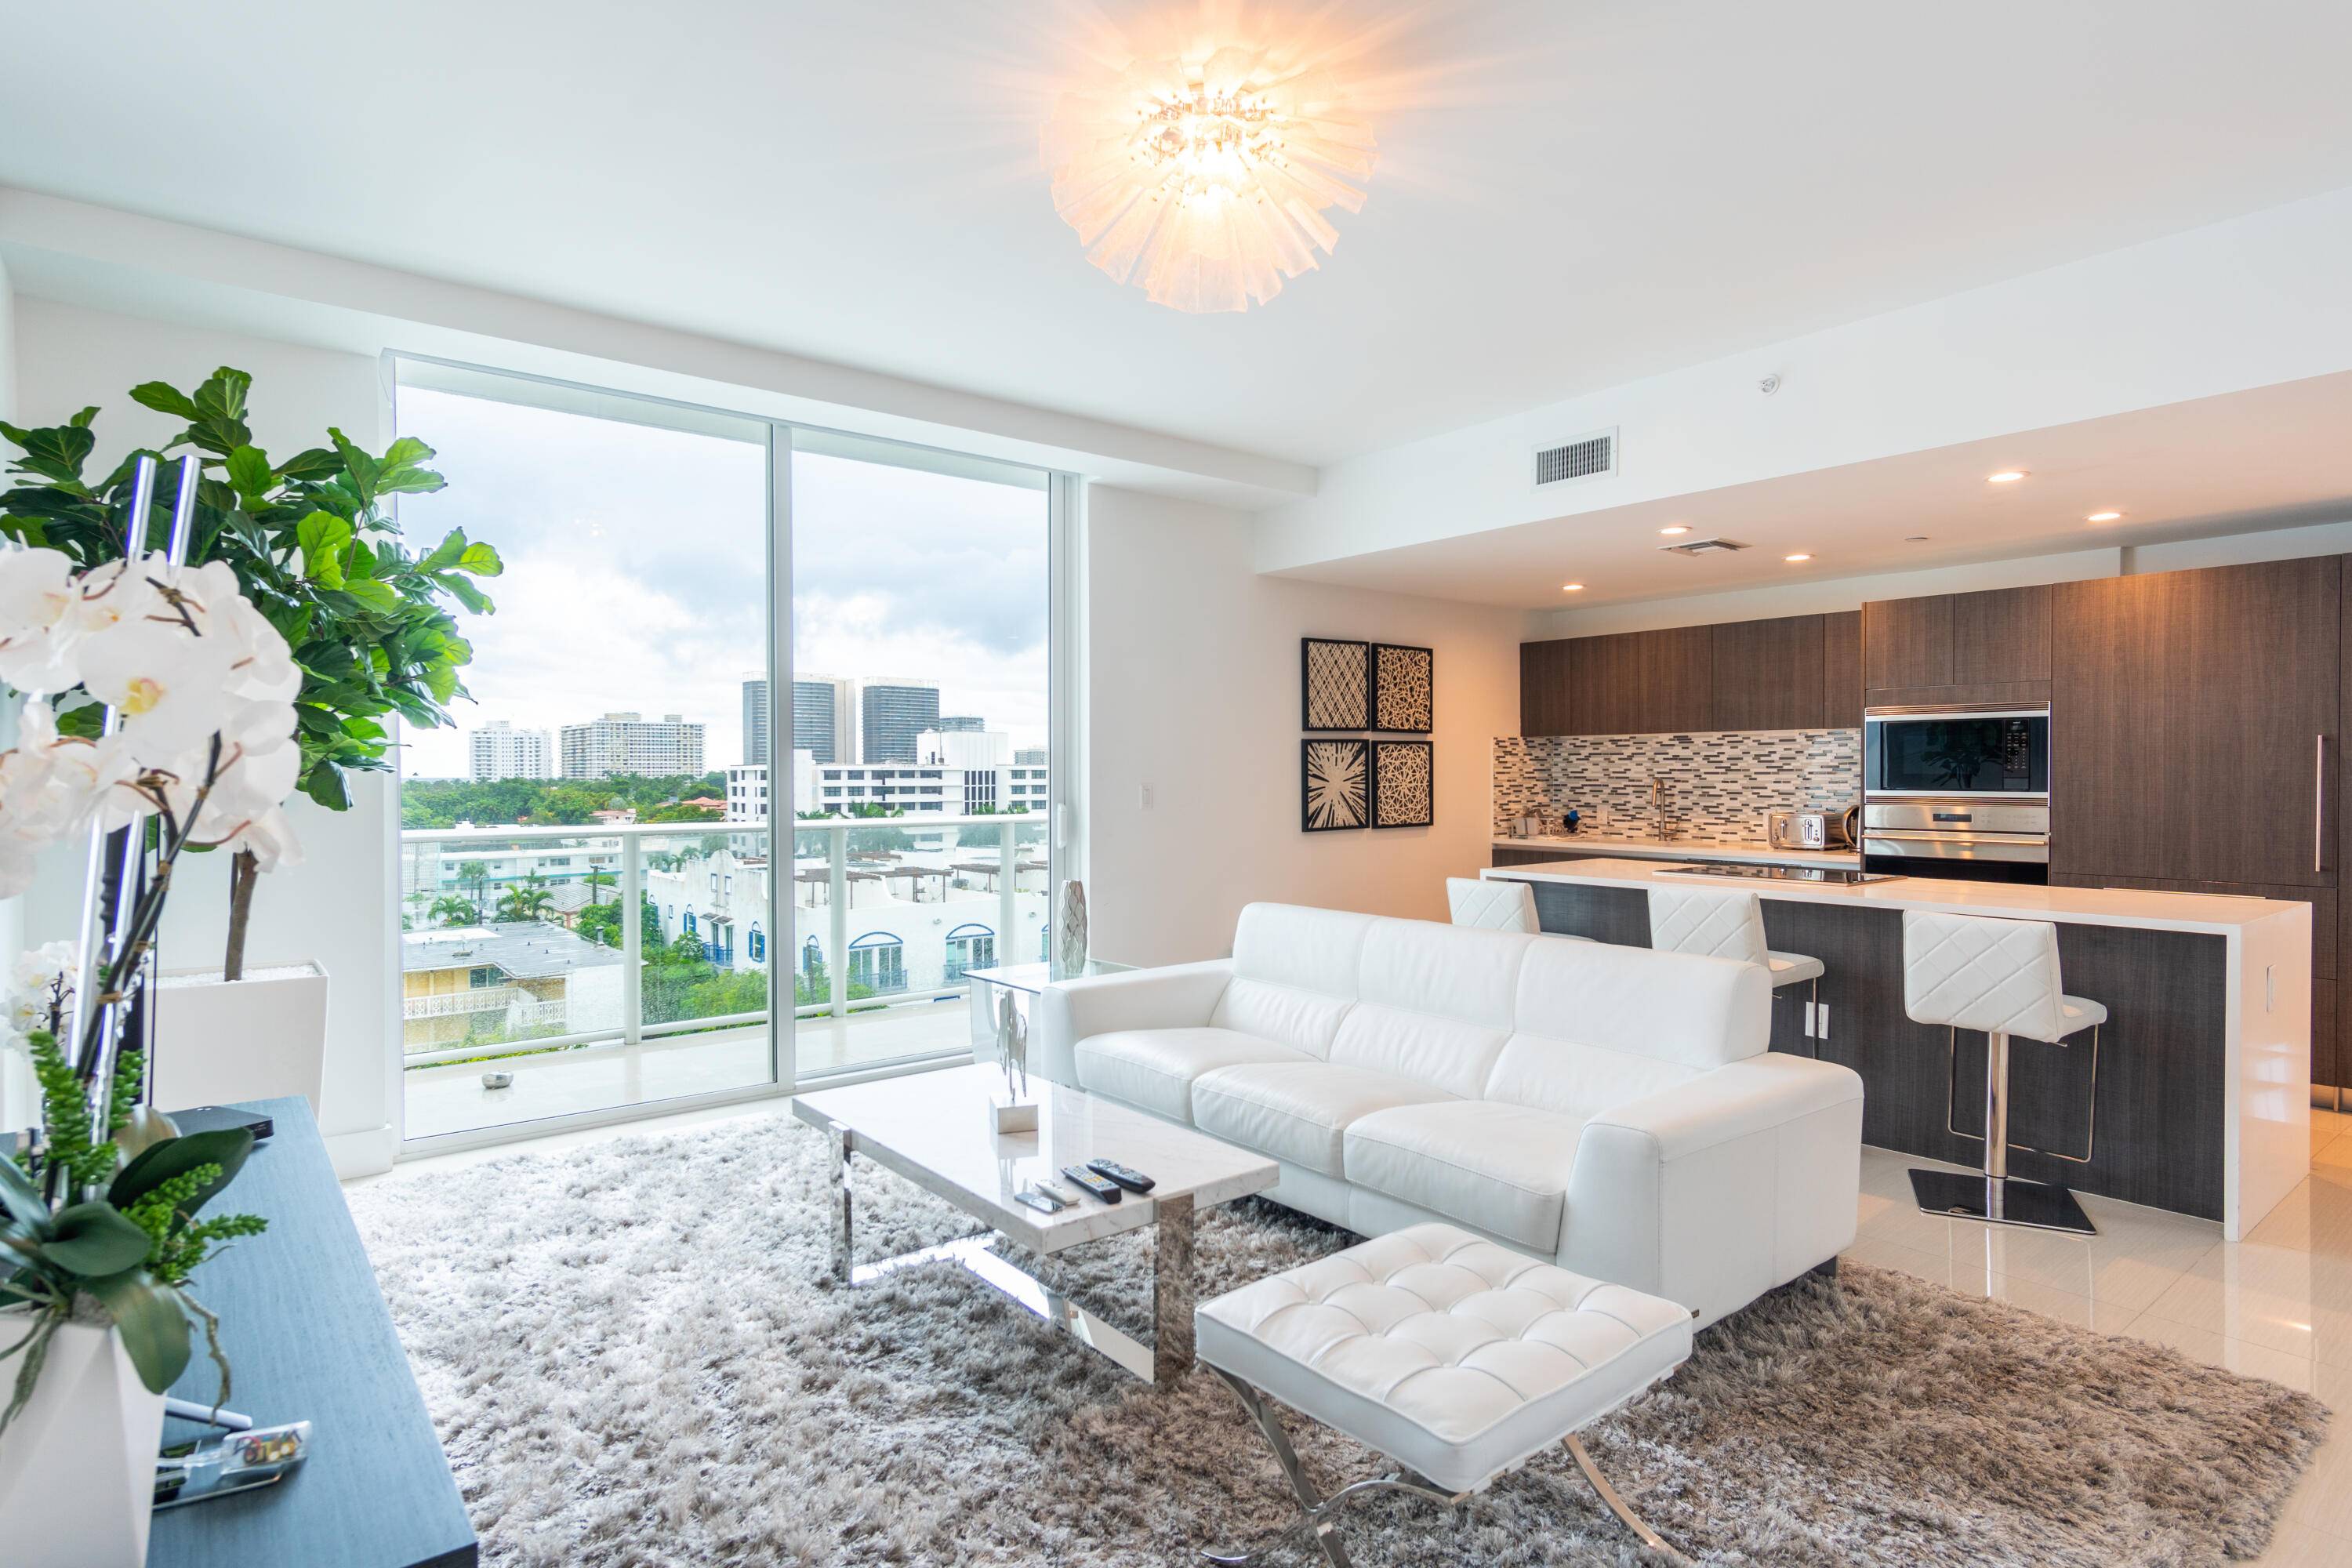 LUXURIOUS PENTHOUSE 30 UNITS NEWER BOUTIQUE BUILDING IN PRESTIGIOUS NEIGHBORHOOD OF BAY HARBOR ISLANDS, BUILDING OFFERS FITNESS CENTER, STEAM ROOM, LOCKERS, BIKE STORAGE, ROOFTOP POOL AND JACUZZI JUST WALKING DISTANCE ...